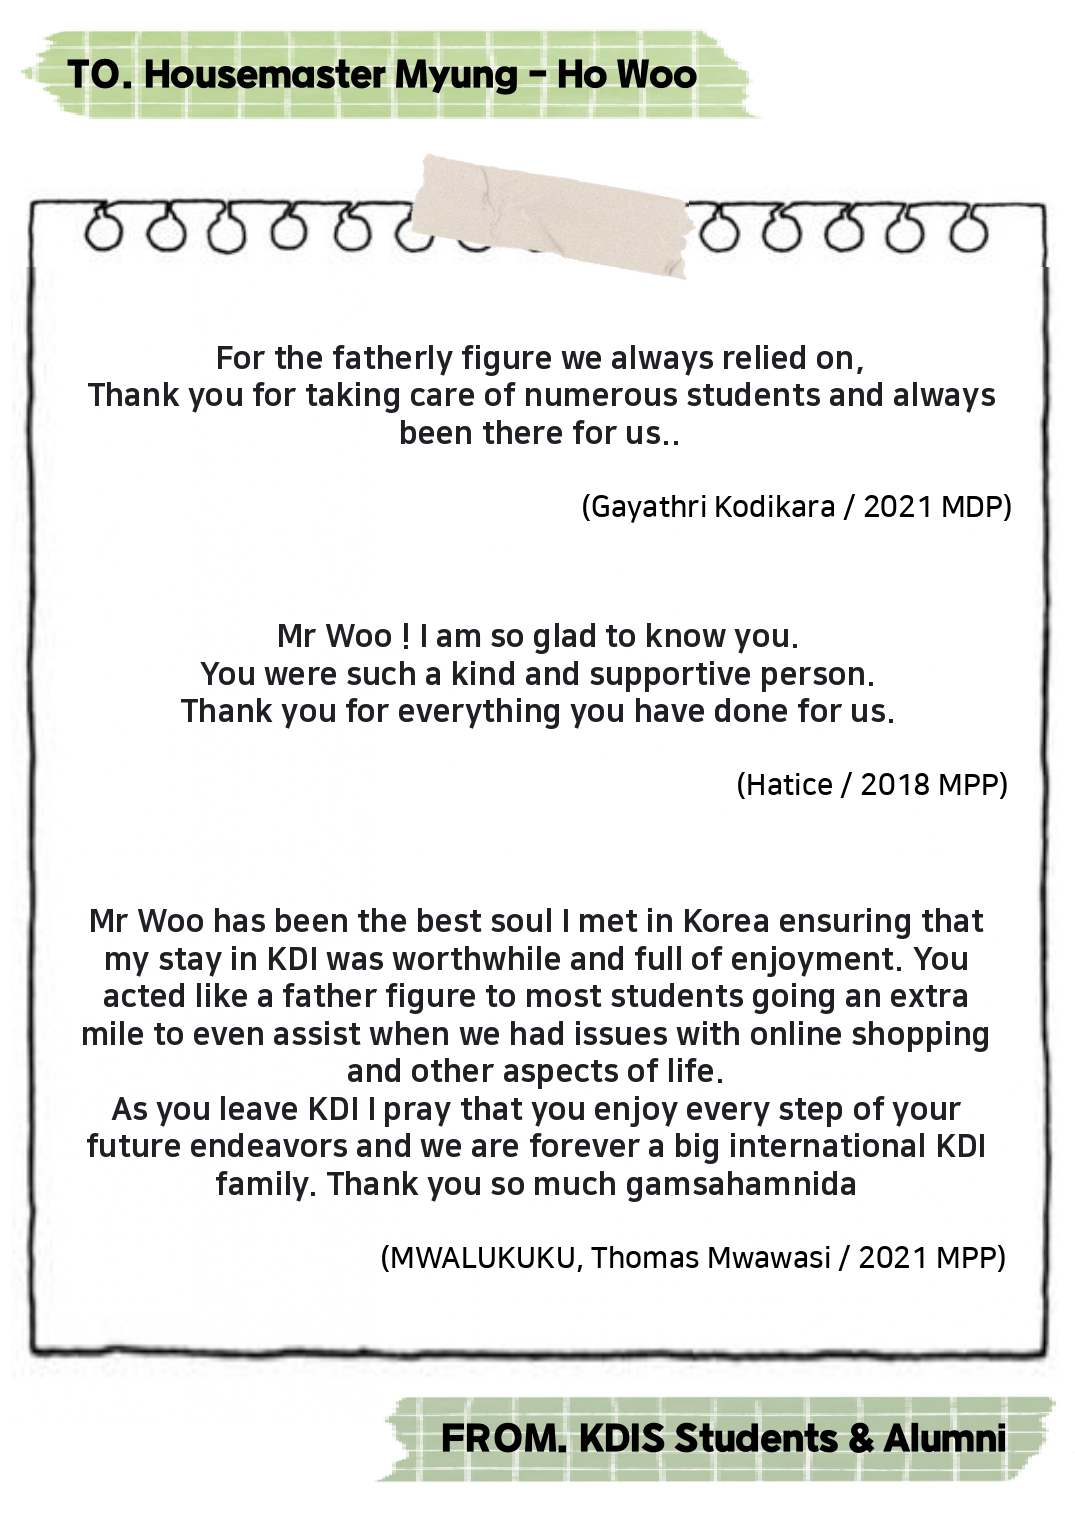 Thank you Housemaster Myung-ho Woo -Messages from KDIS Students and Alumni 사진27